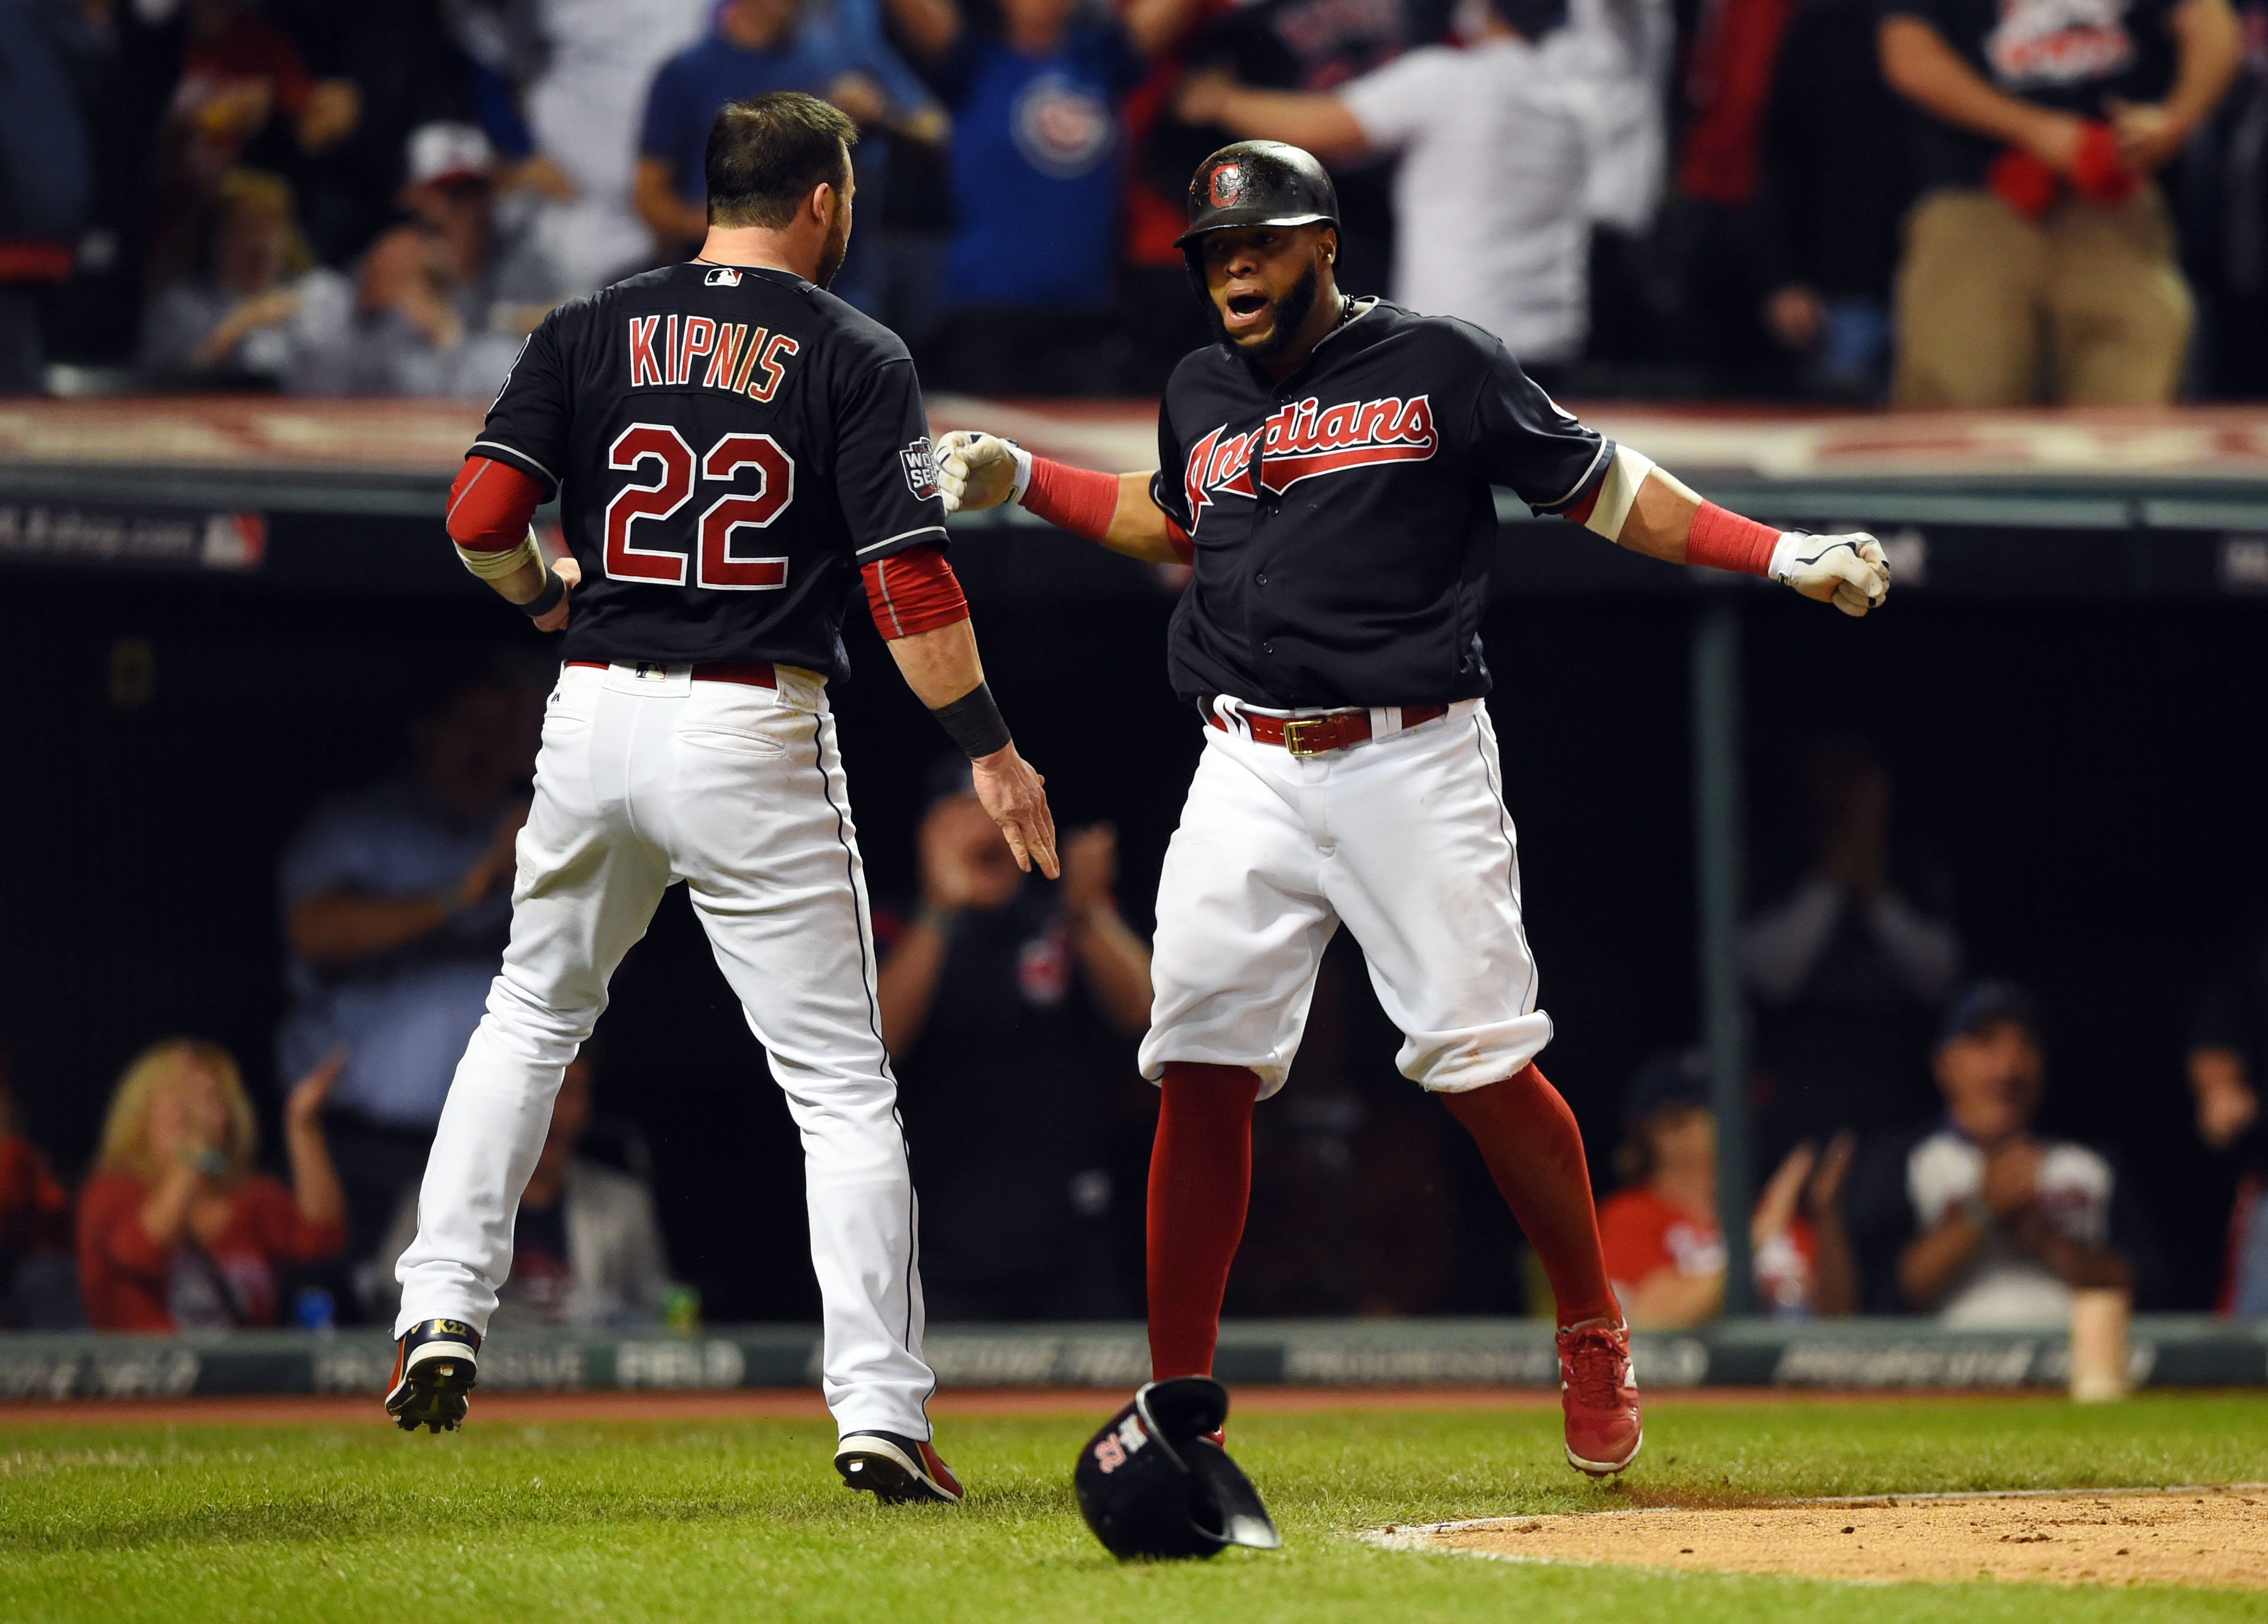 Why haven't the Cleveland Indians won the World Series since 1948?